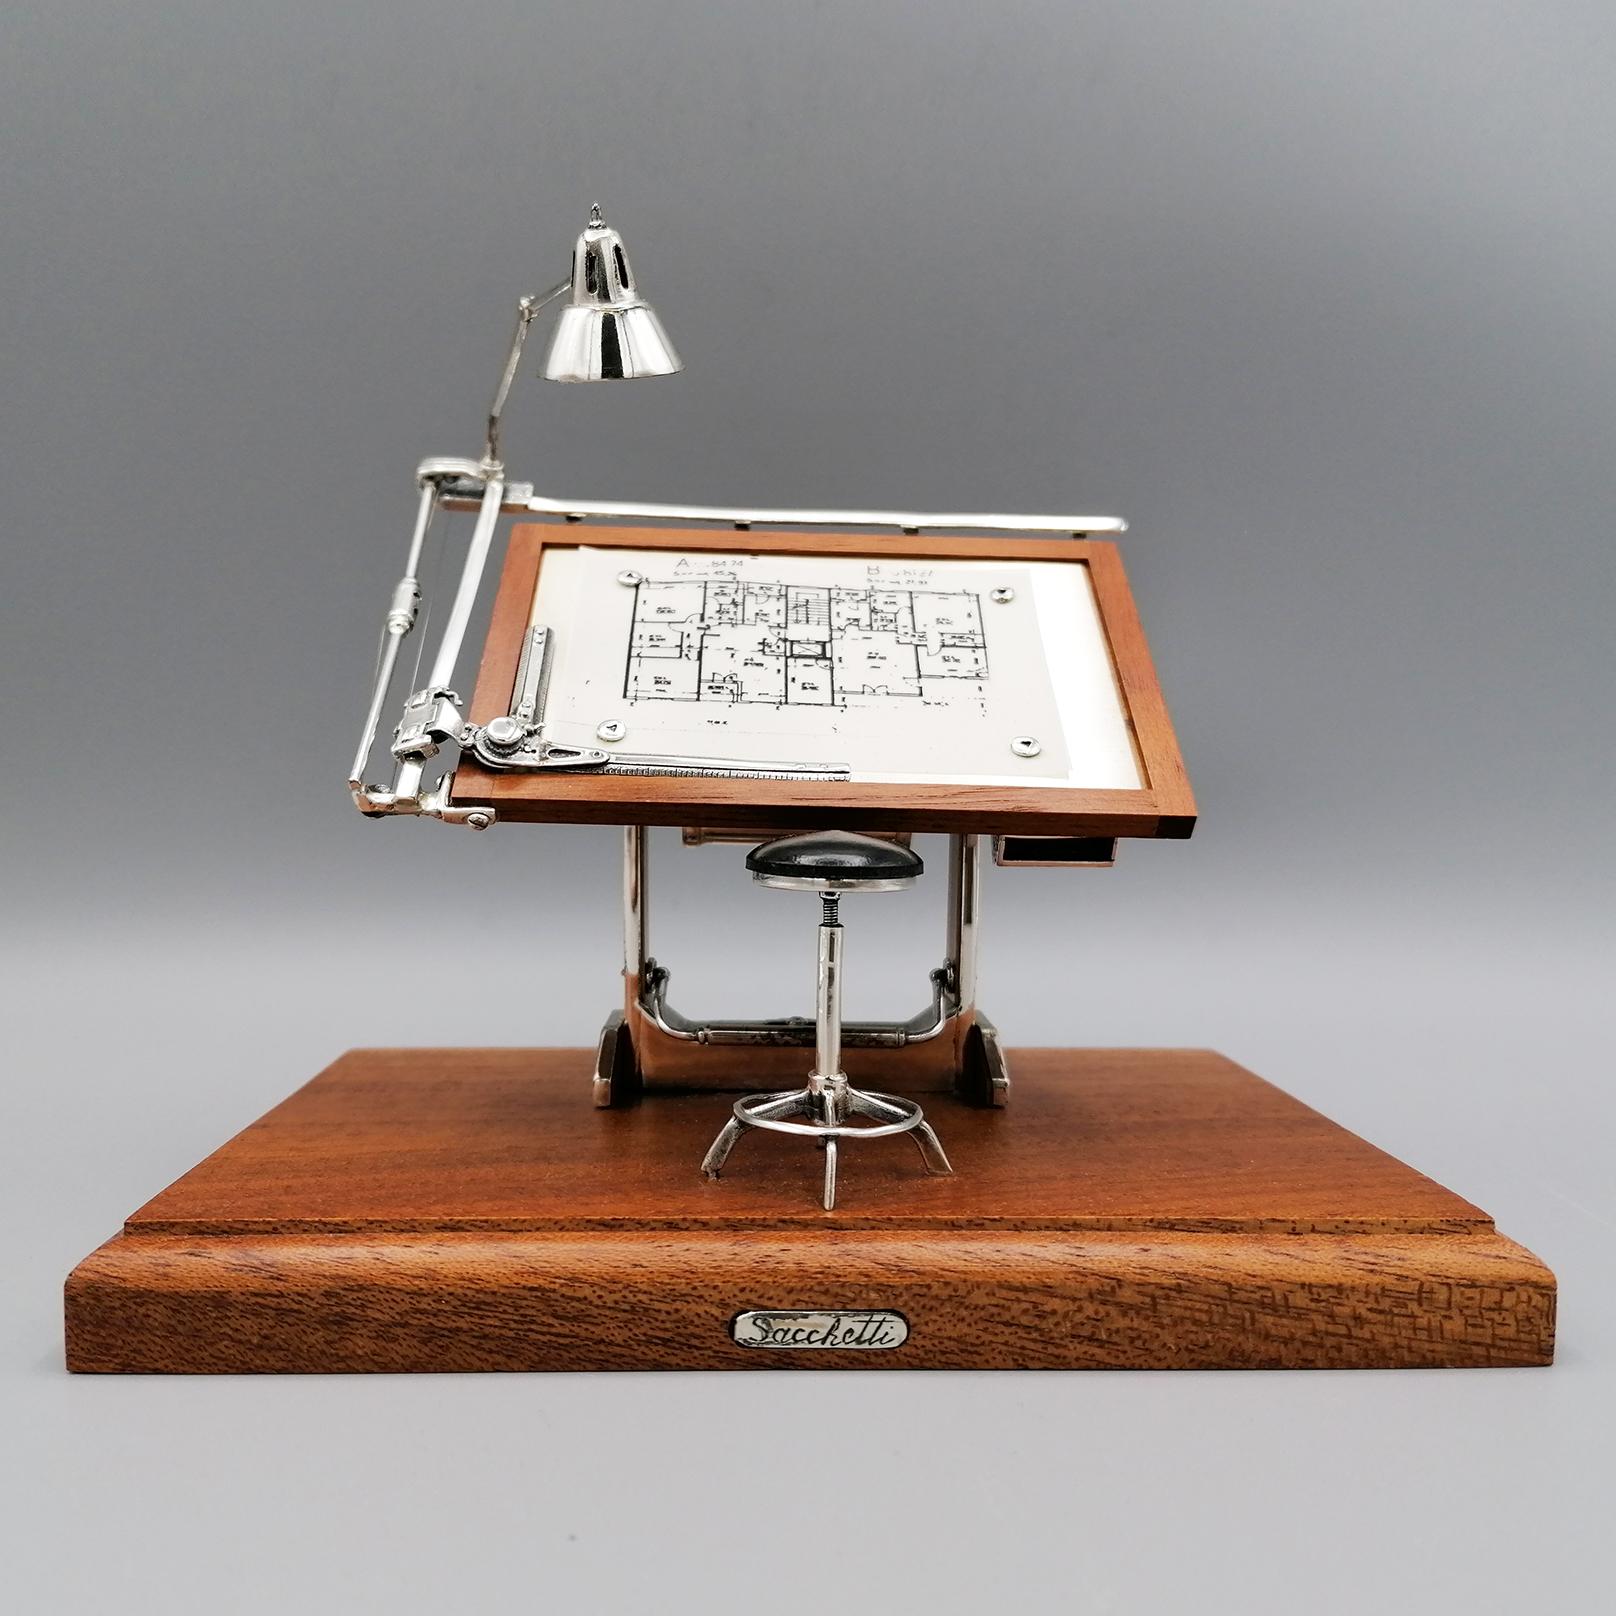 Miniature in sterling silver and walnut burl depicting drafting machine and stool.
The miniature is made entirely by hand and treated in detail by the master craftsman 
Sacchetti - Arezzo - Tuscany
Wooden base.
 